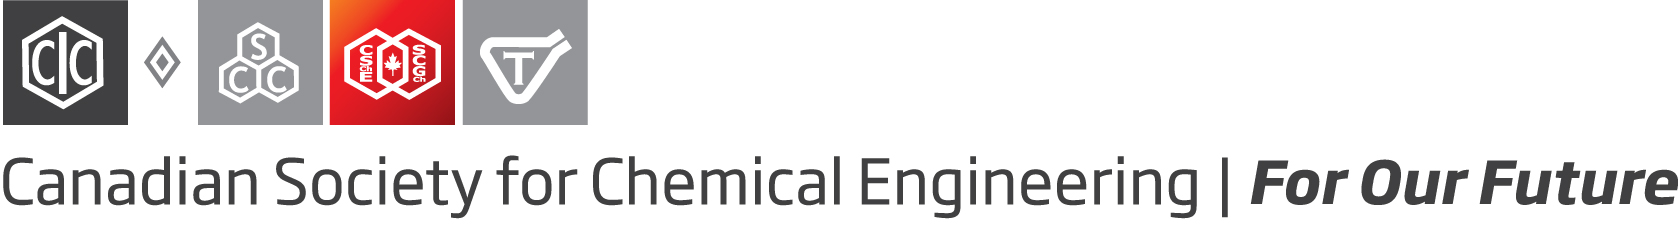 Canadian Society for Chem. Engineering